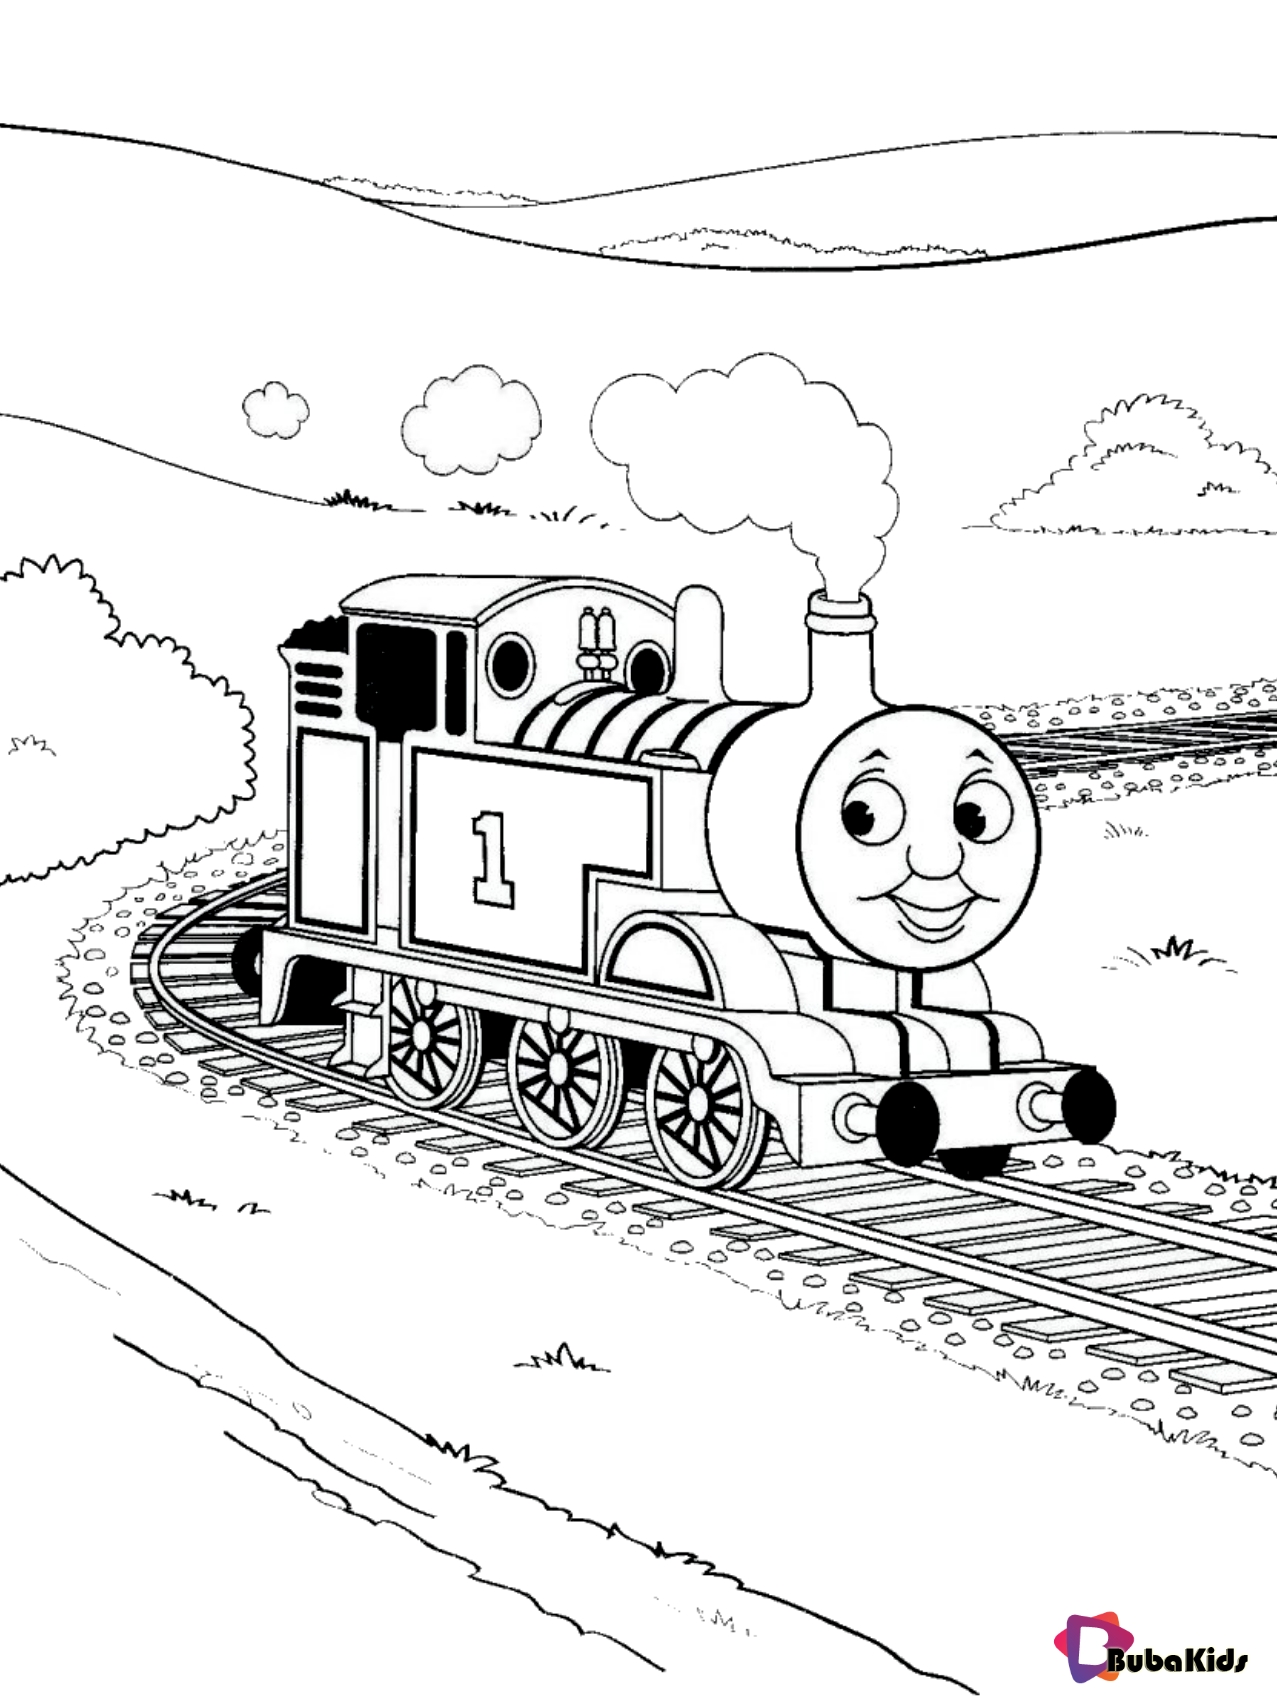 Thomas The Tank Engine coloring page for kids Wallpaper